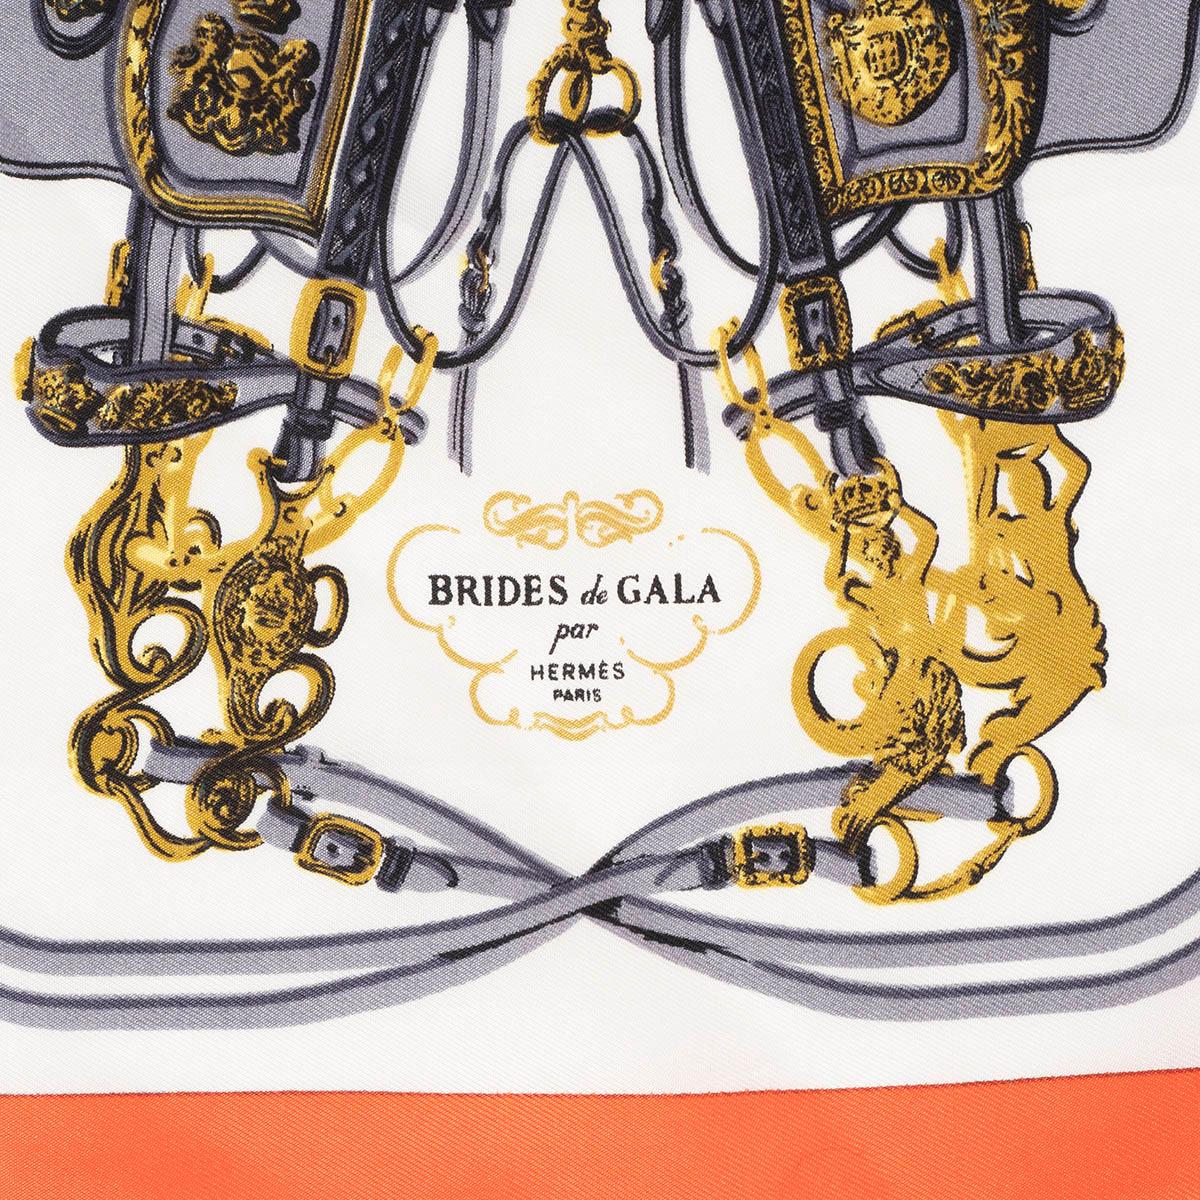 100% authentic Hermes 'Brides de Gala' mini scarf by Hugo Grykar in white and red silk twill (100%) with details in gold. Rare miniature size. Brand new in box.

Width	20cm (7.8in)
Height	20cm (7.8in)

All our listings include only the listed item